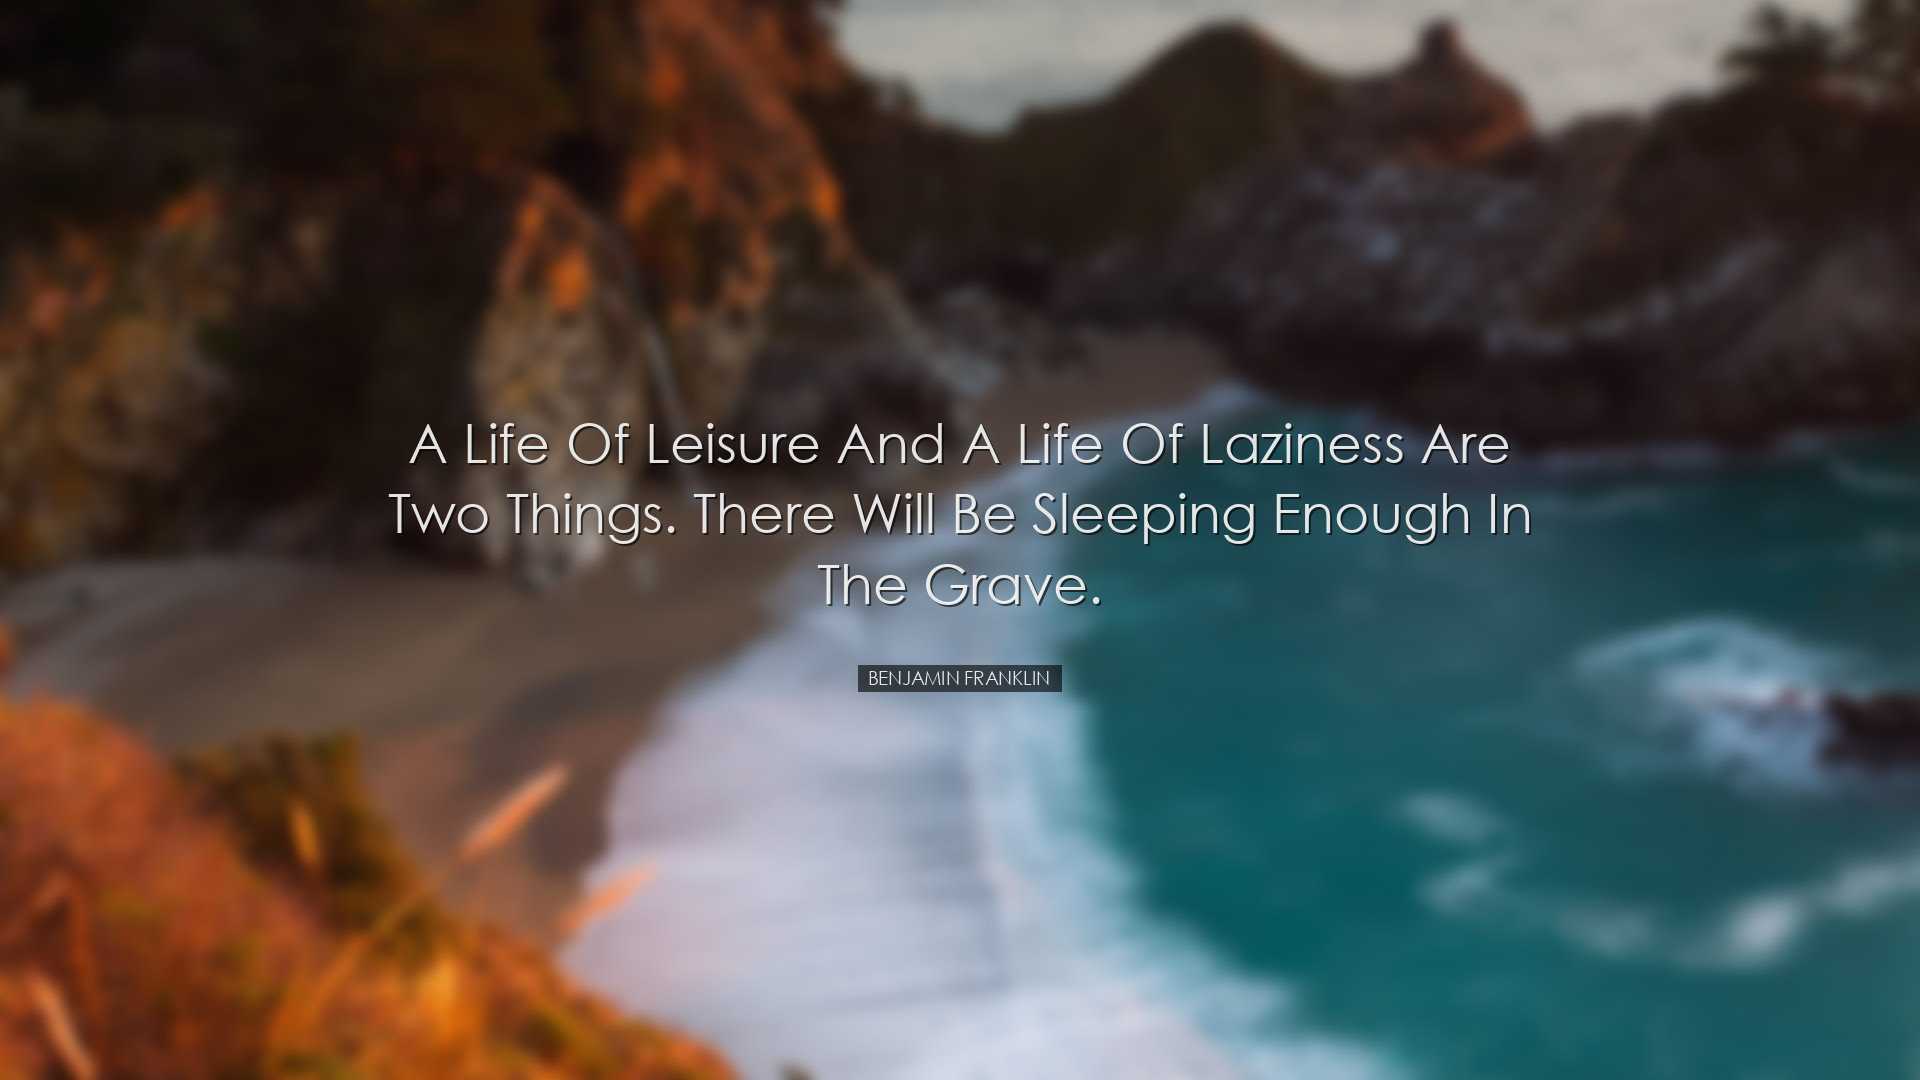 A life of leisure and a life of laziness are two things. There wil